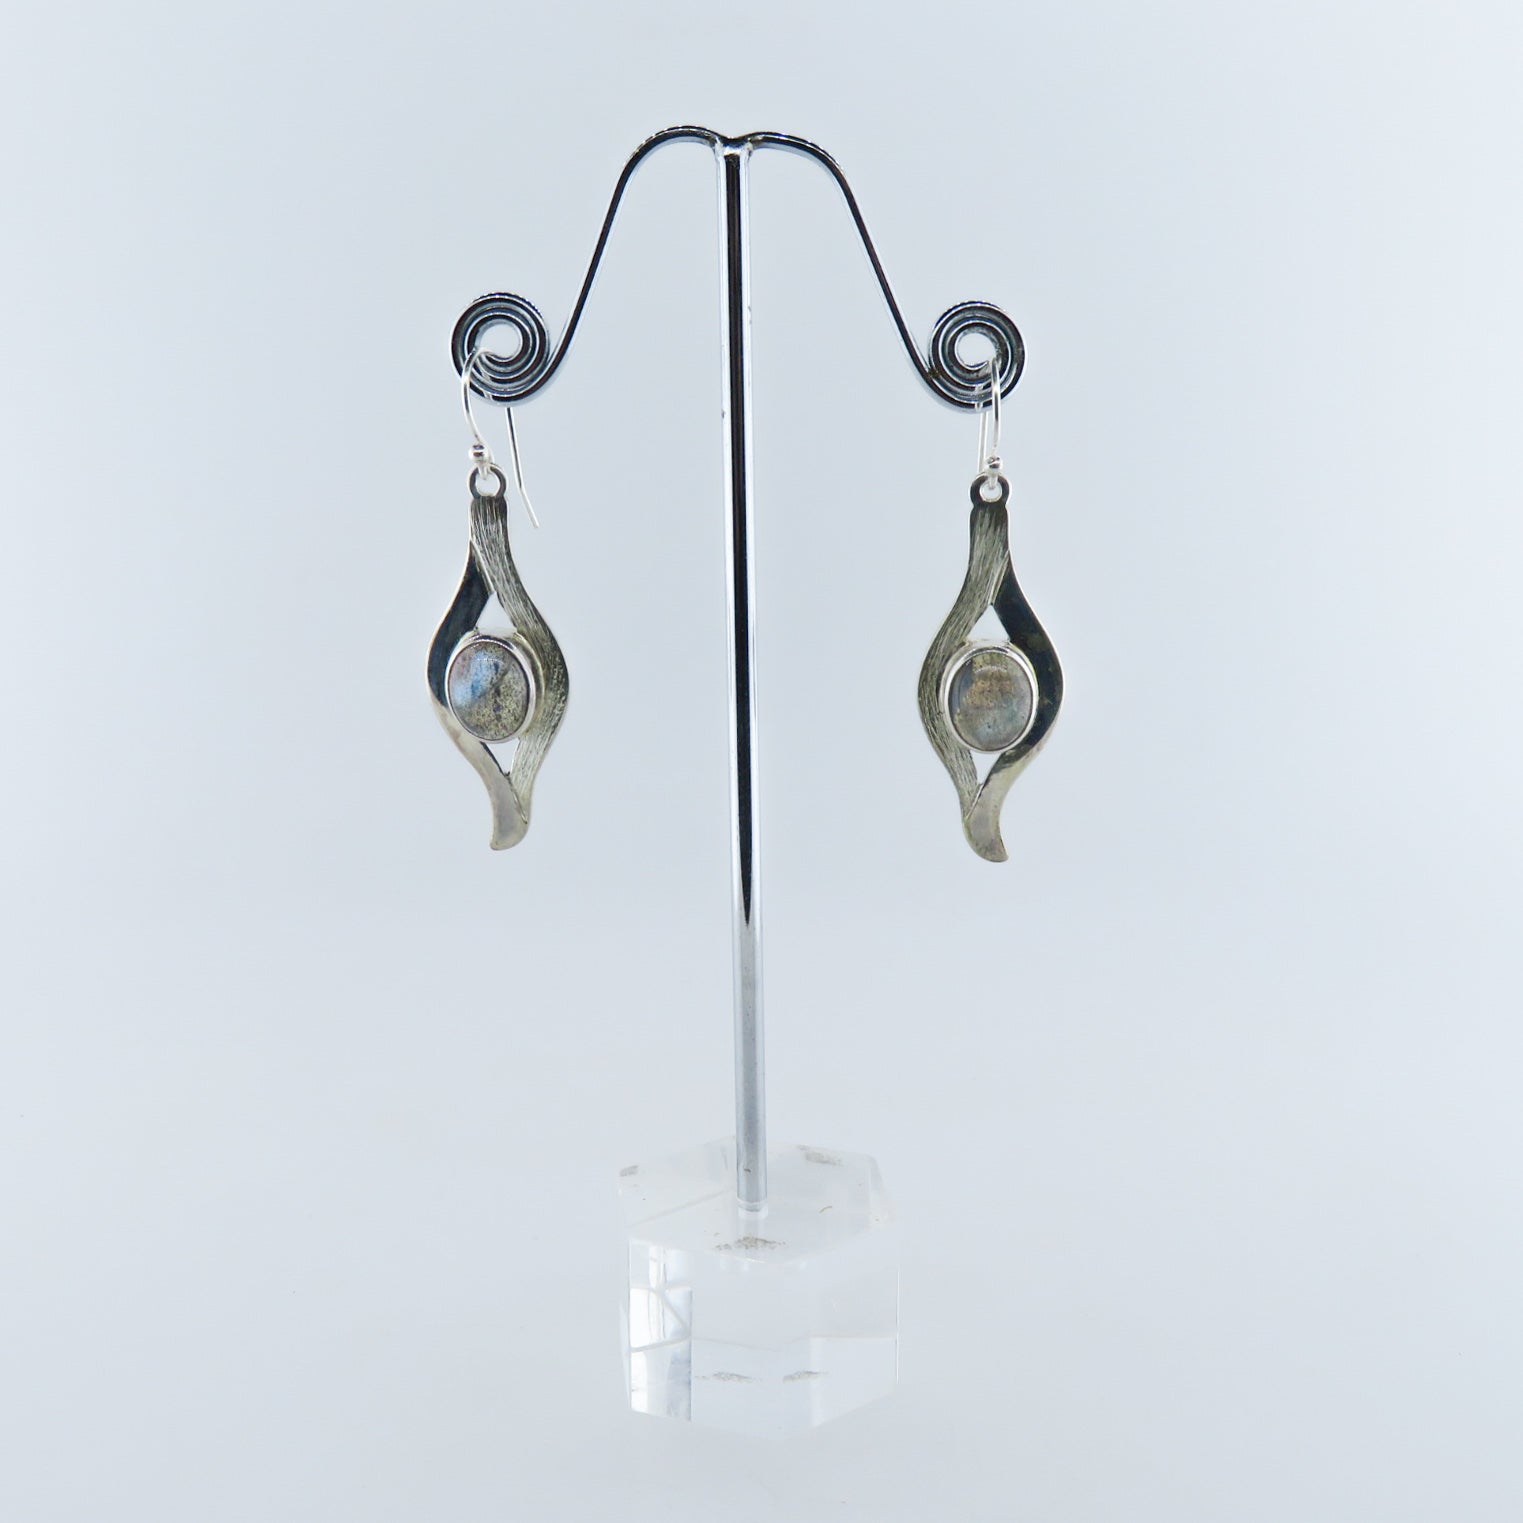 Labradorite Earrings with Sterling Silver